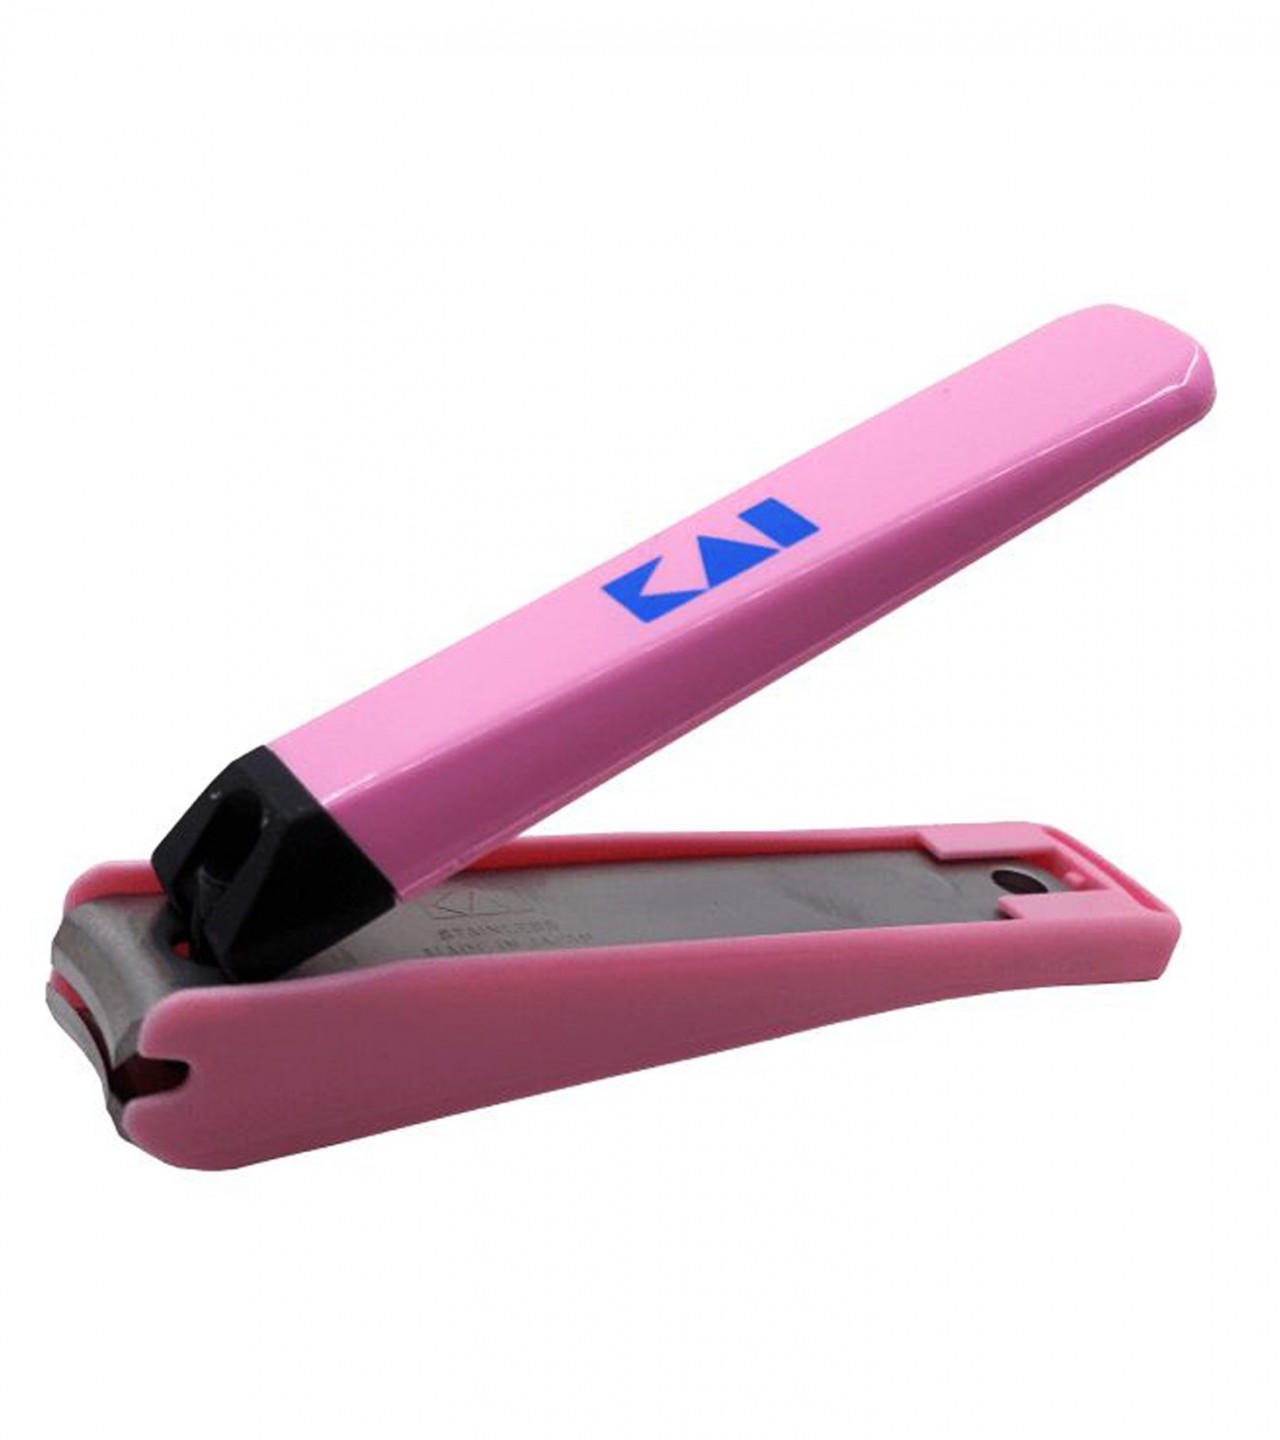 KAI Nail Clipper / Cutter For Unisex (Large)